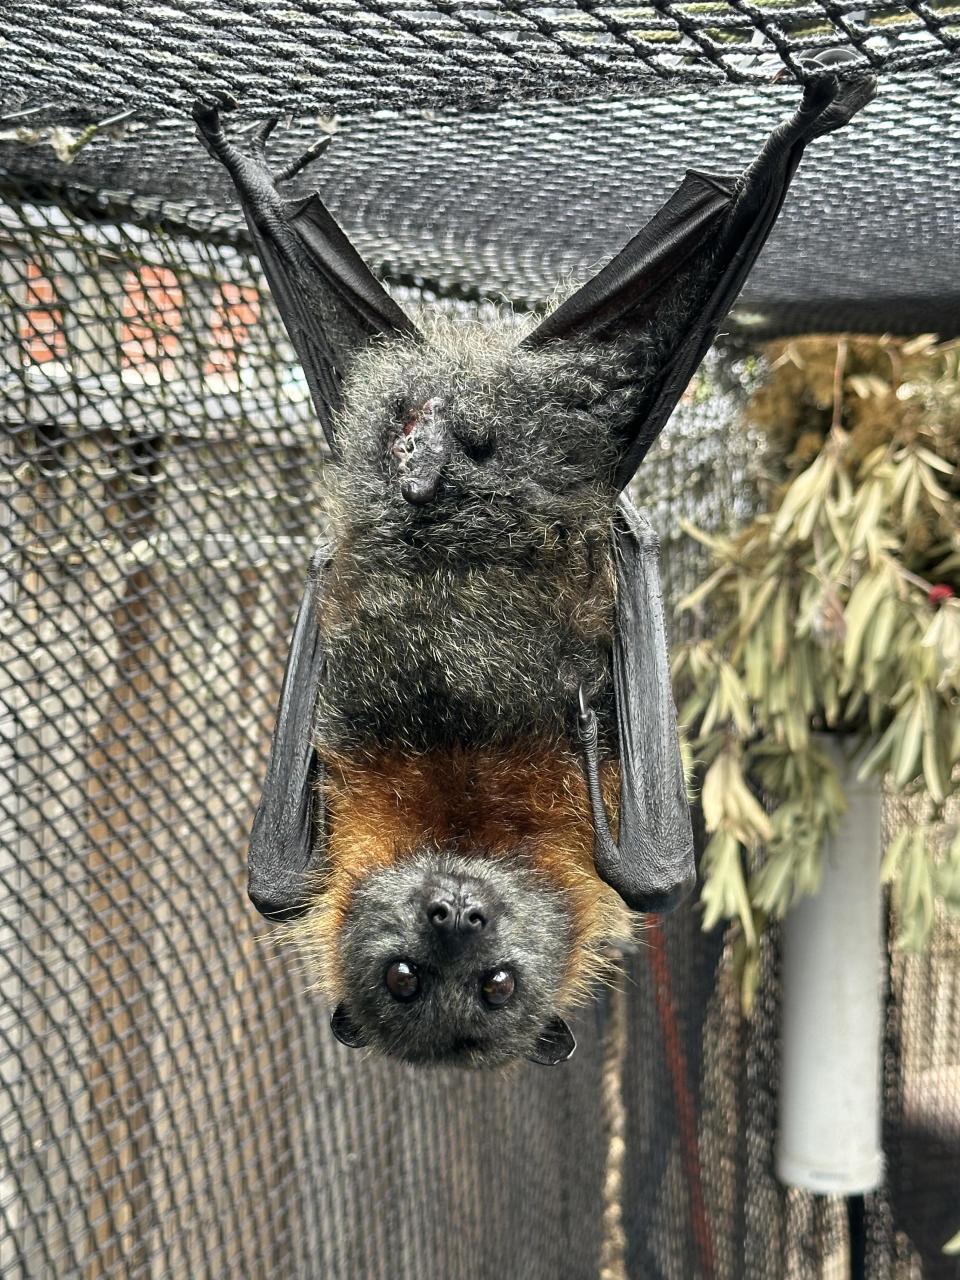 The flying fox hanging upside down in care with his legs spread.